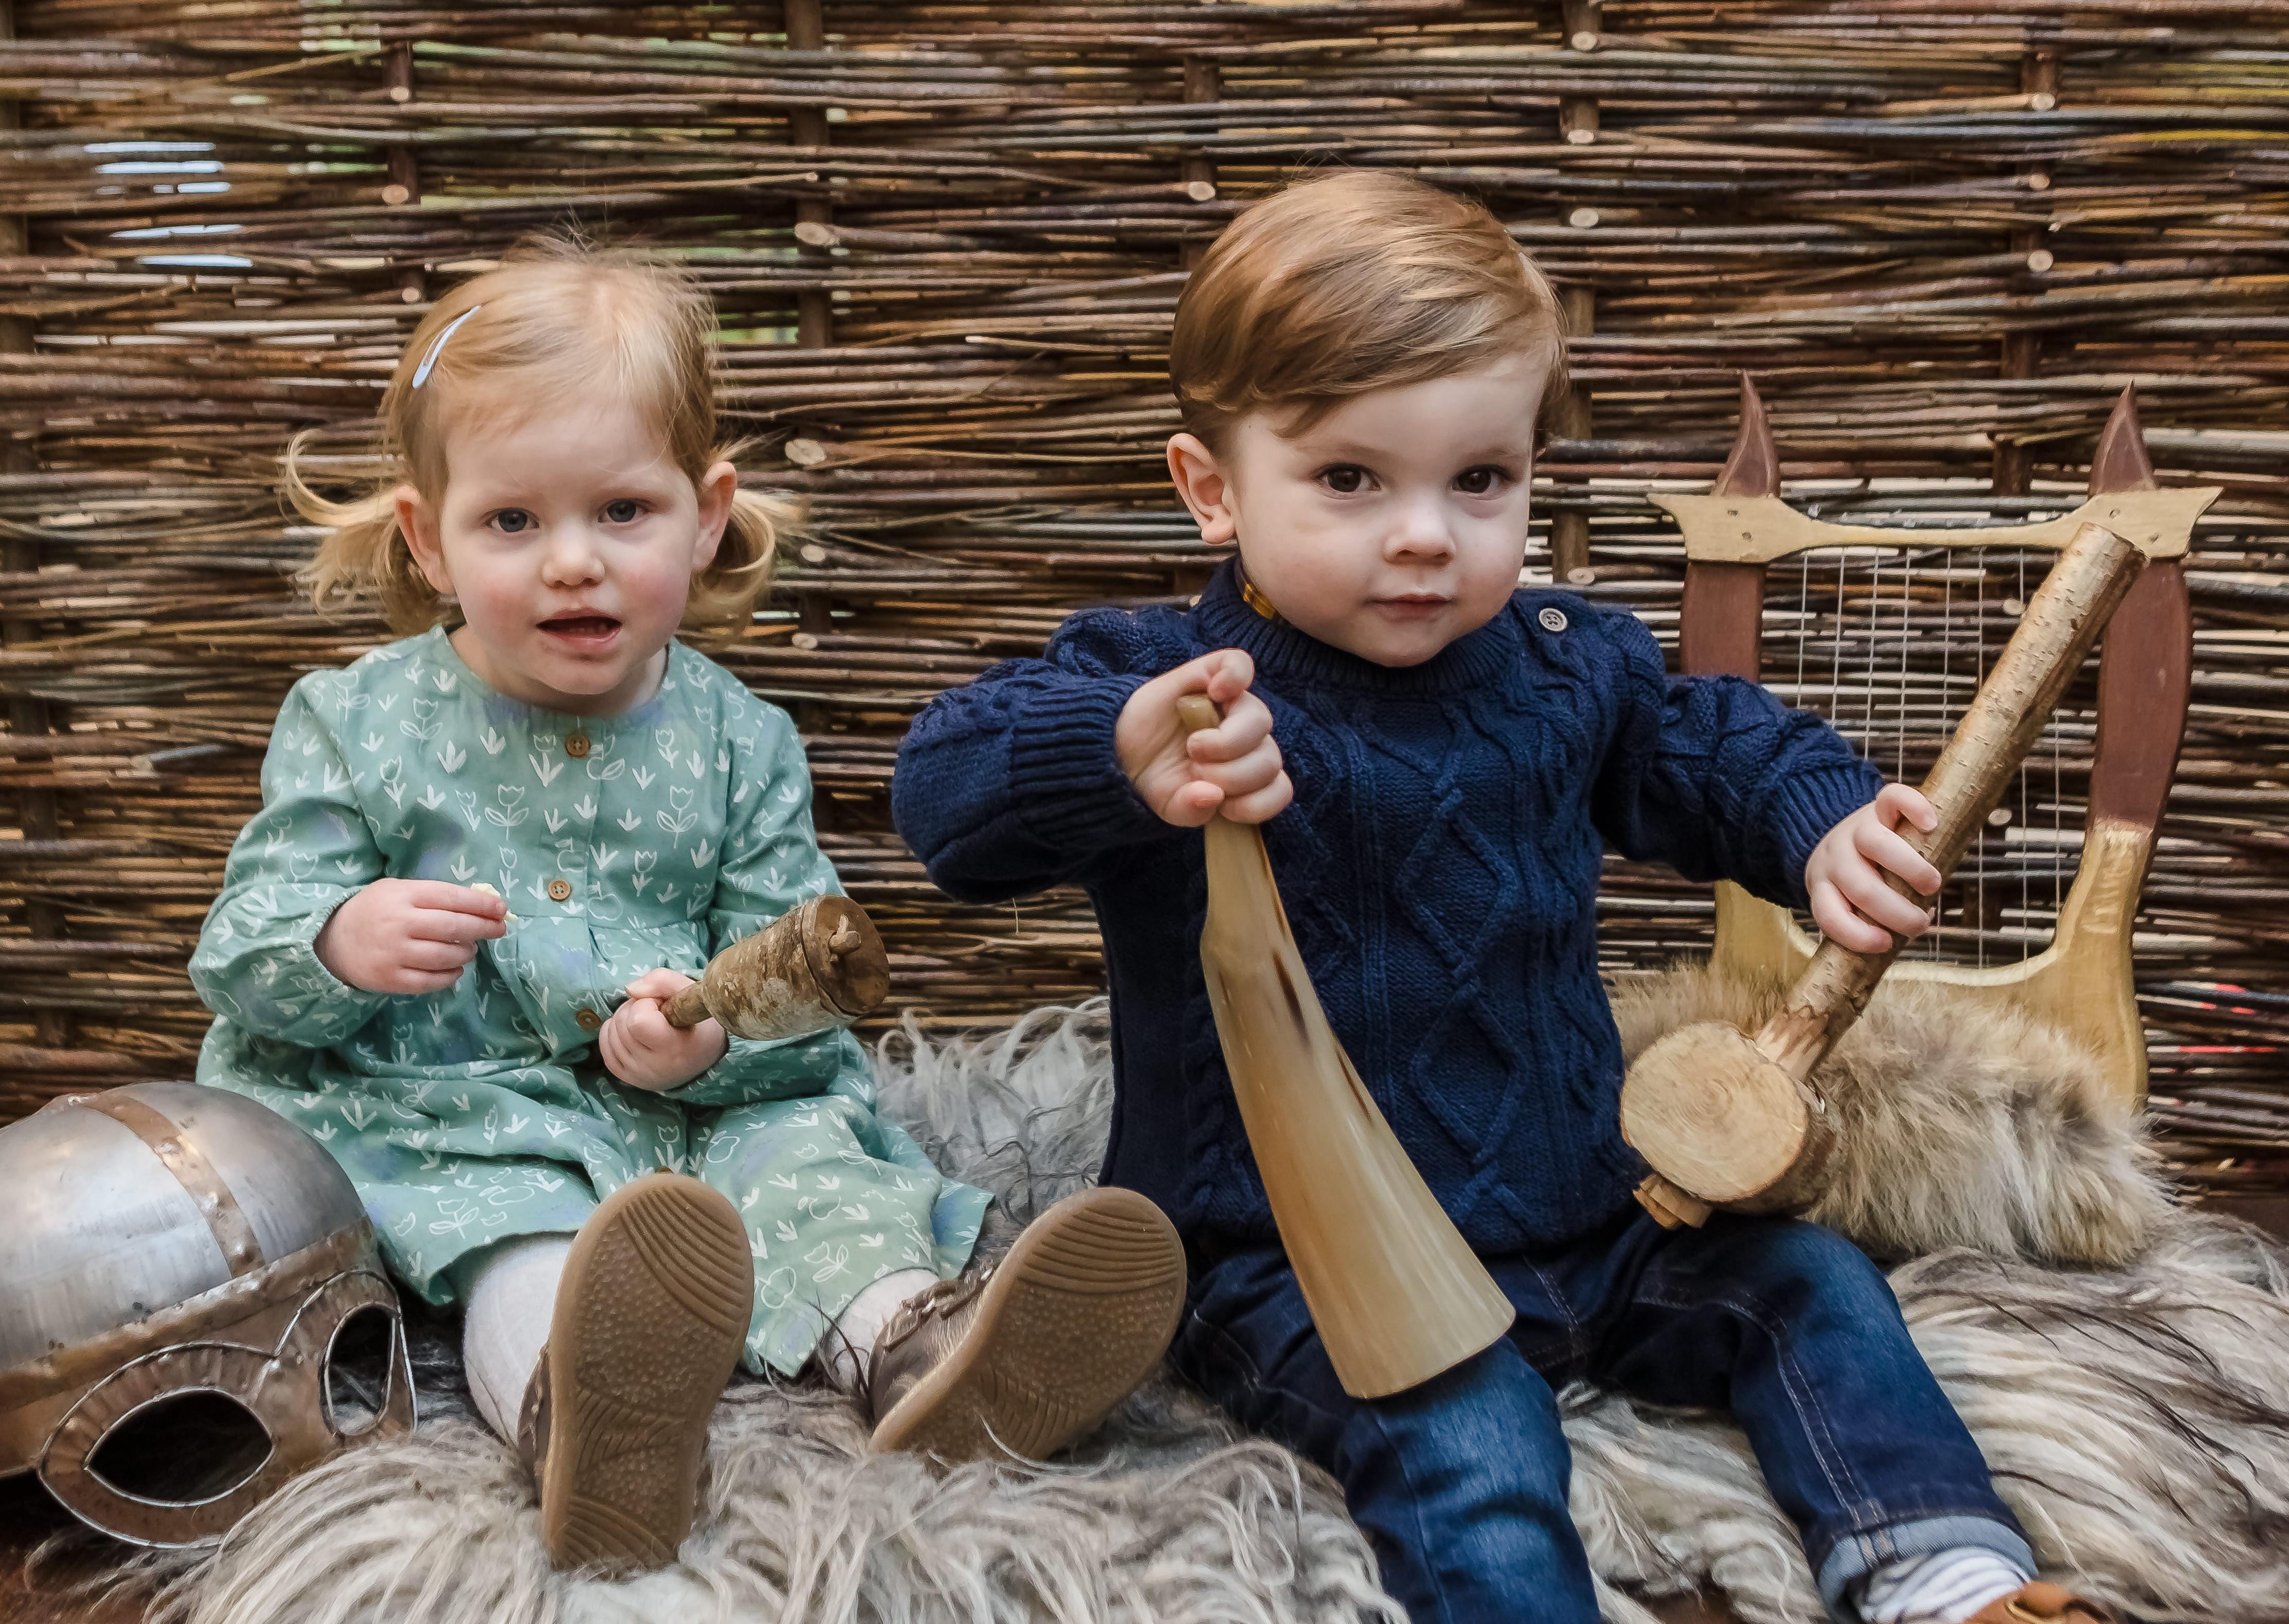 Toddlers Take Over, North Down Museum. February 14
An army of tiny Vikings will invade North Down Museum when the annual Toddlers Take Over event returns. This popular event  will allow wee ones aged 2 - 4 years, to experience the museum in a way which is especially designed for them.